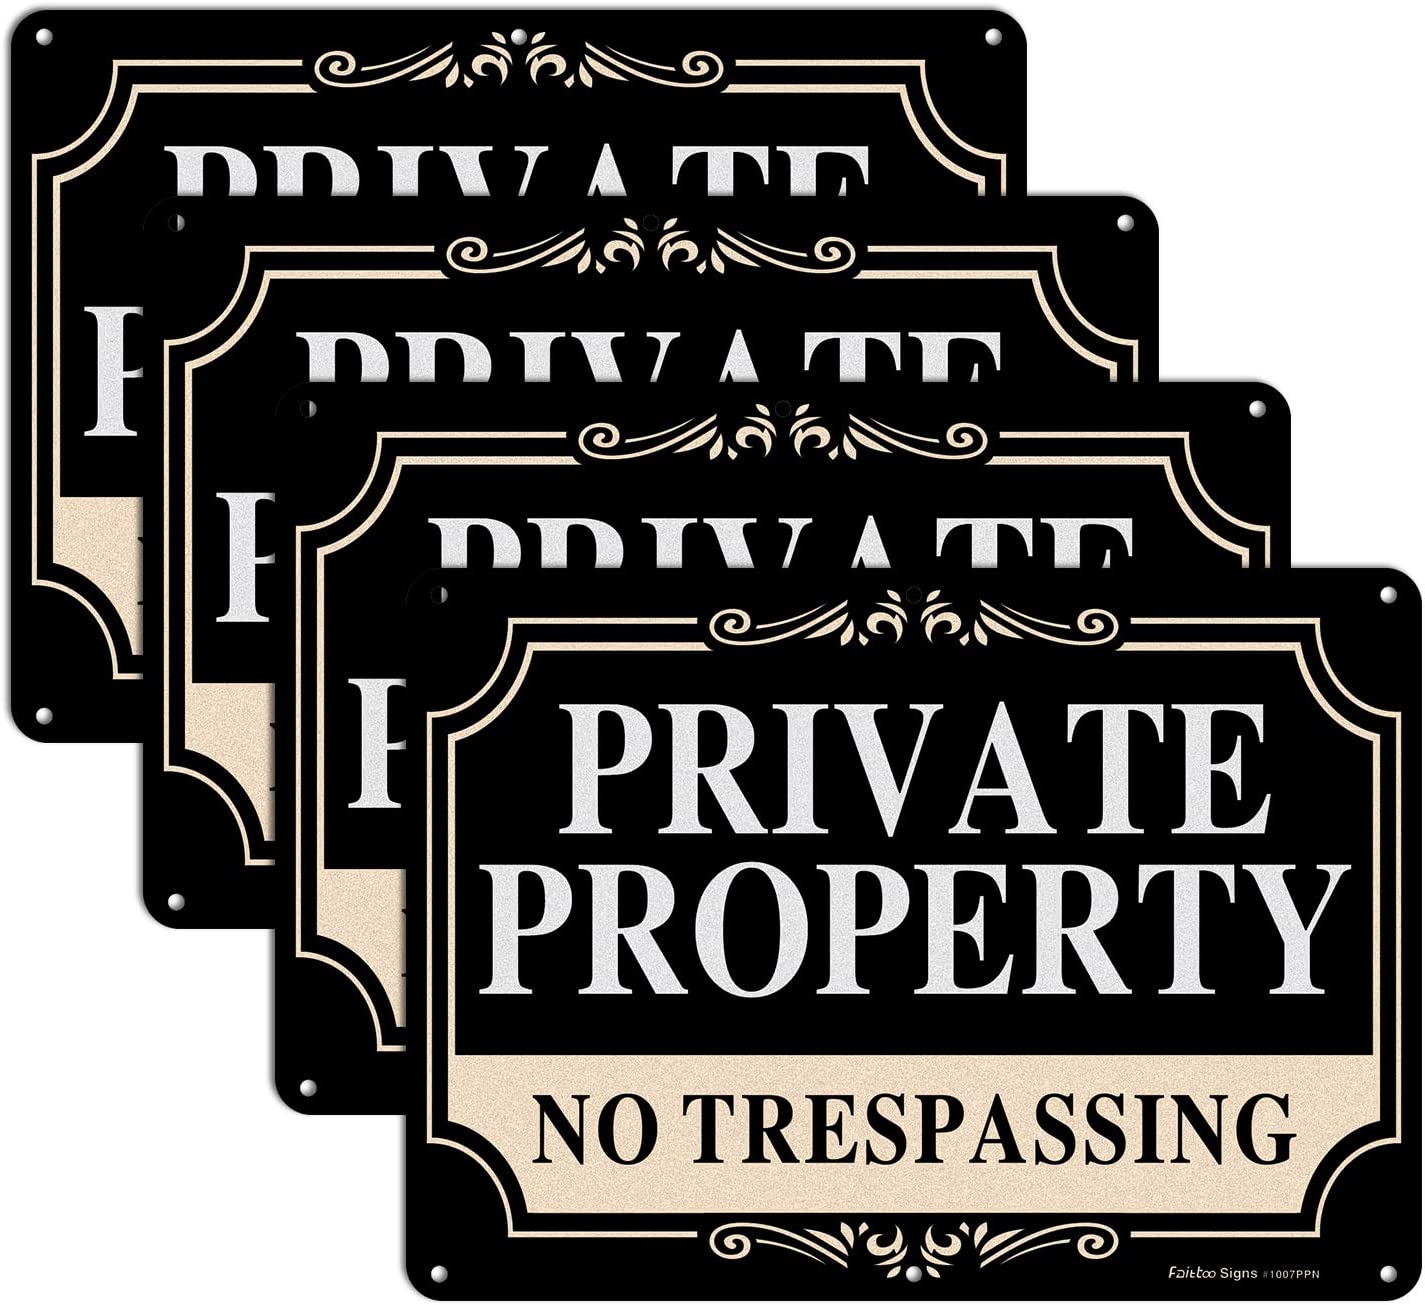 No Trespassing Signs Private Property,14x10 Inch Rust Free Aluminum Metal Sign,Reflective,Fade Resistant,UV Protected,Weatherproof Up to 7 Years Indoor/Outdoor Use